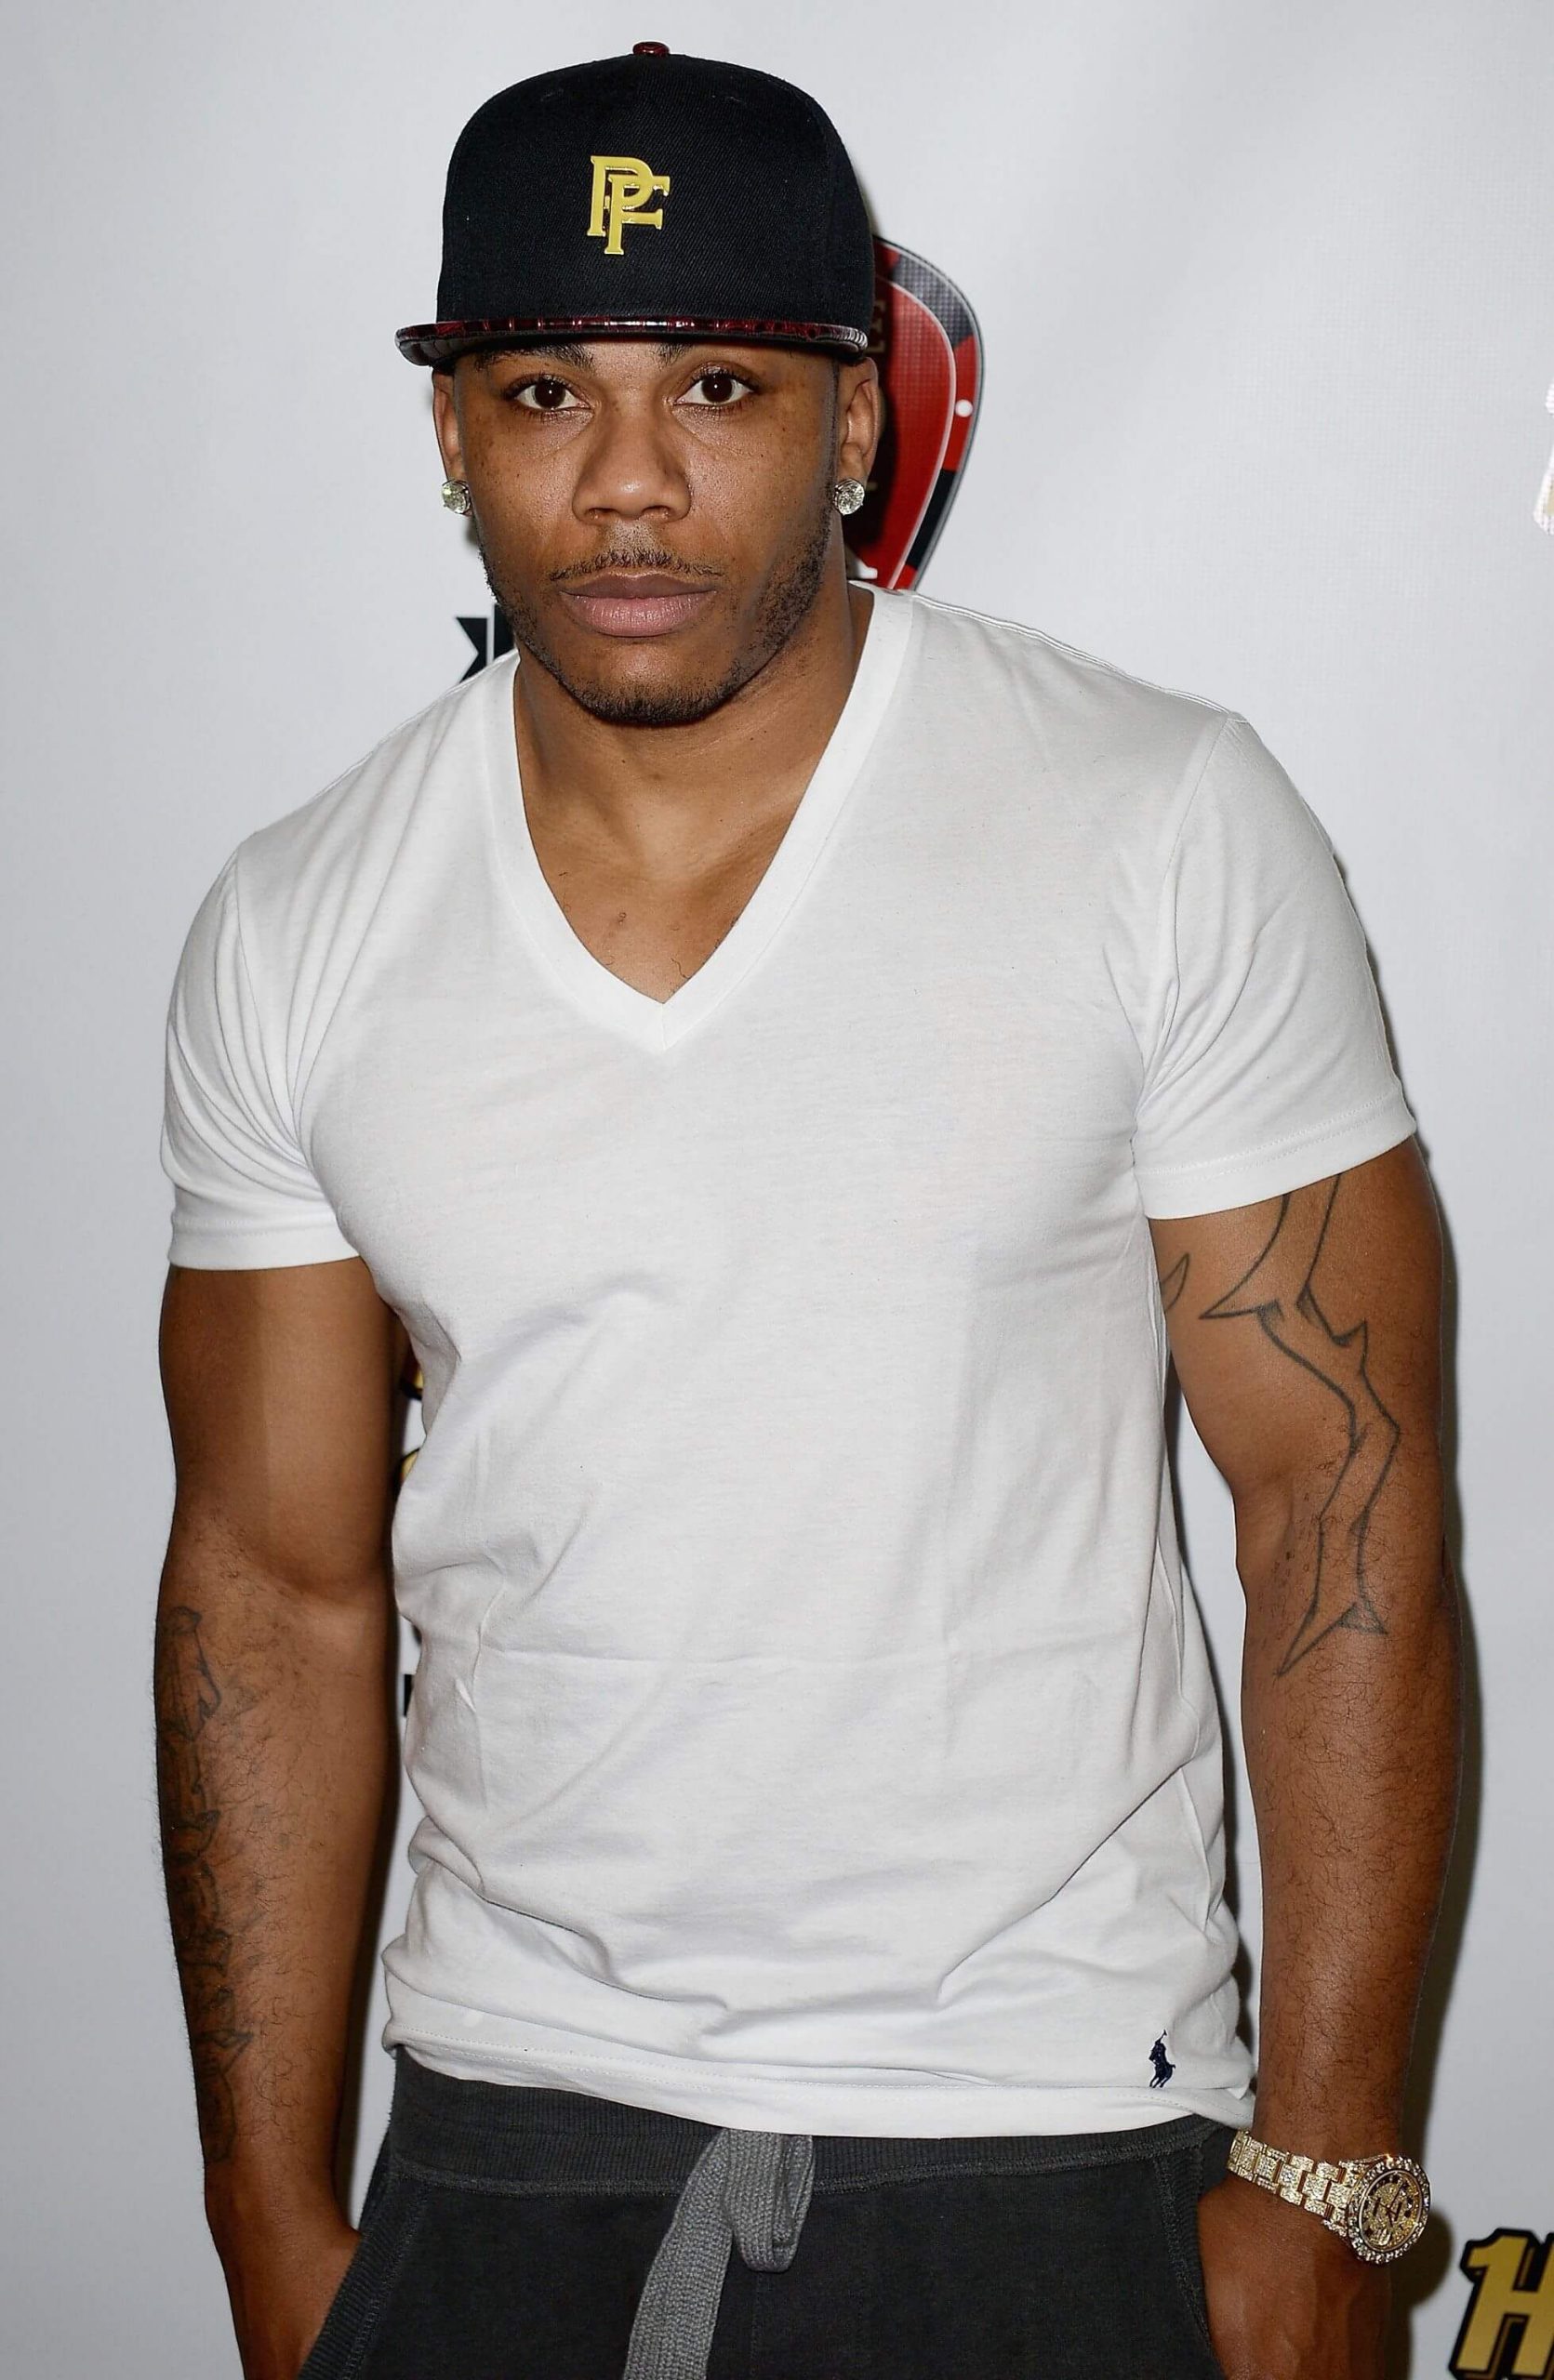 Nelly Net Worth Age Height Weight Awards And Achievements